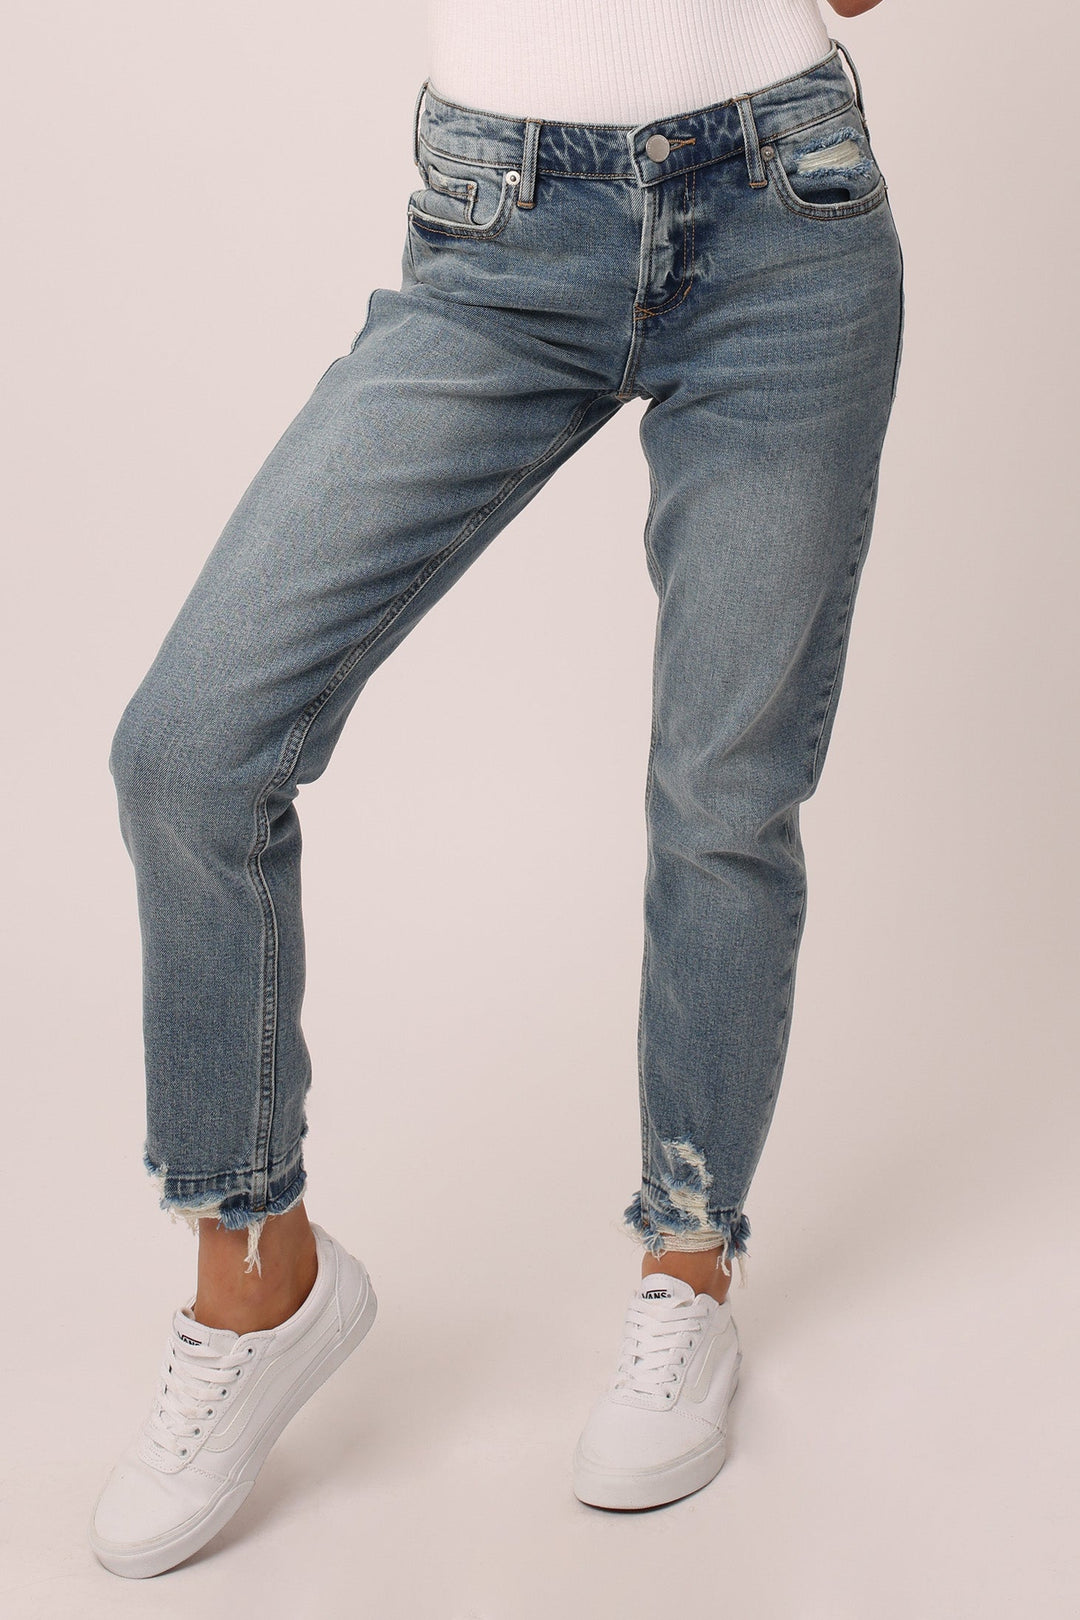 image of a female model wearing a BLAIRE HIGH RISE ANKLE SLIM STRAIGHT JEANS DACOSTA DEAR JOHN DENIM 